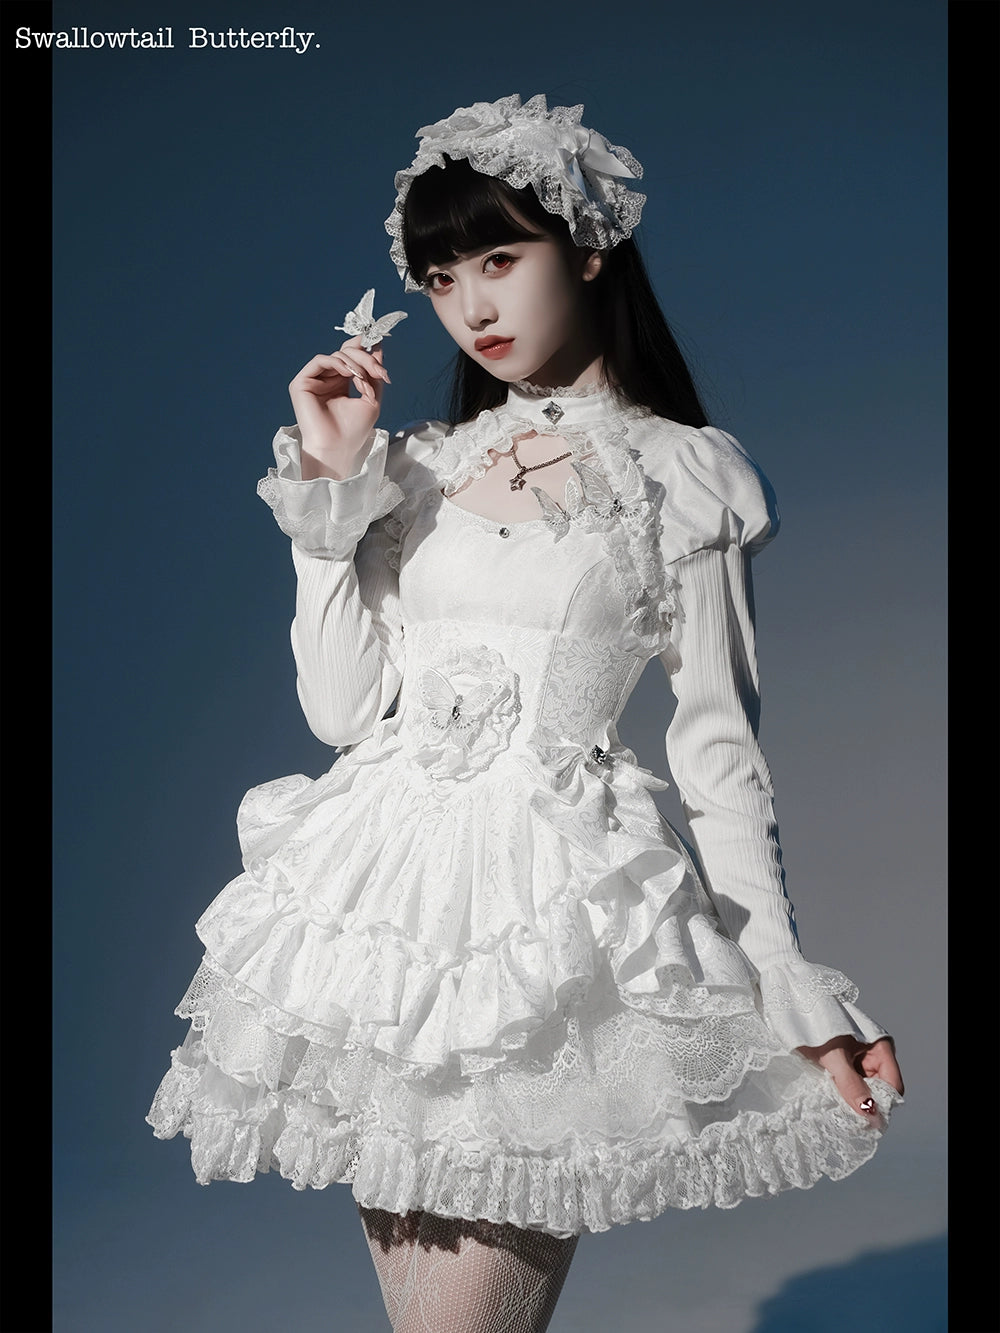 MORY HITOMI~Swallowtail Butterfly~Gothic Lolita Skirt Skeleton Embroidered Dress 37496:560594